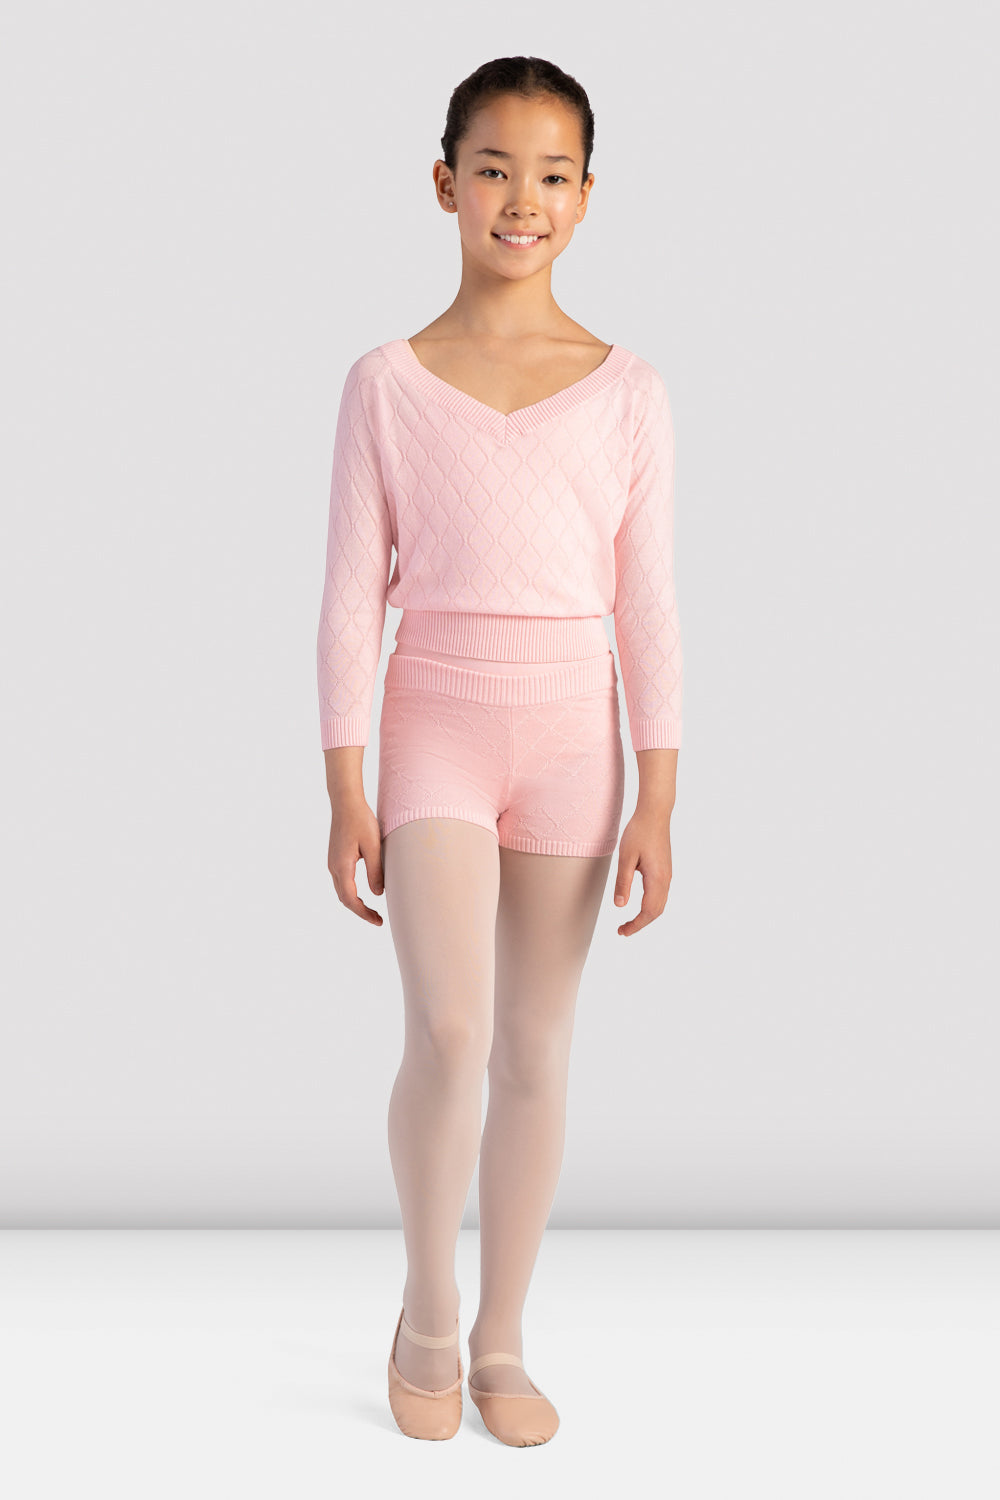 BLOCH Girls Briony Knit Shorts, Candy Pink